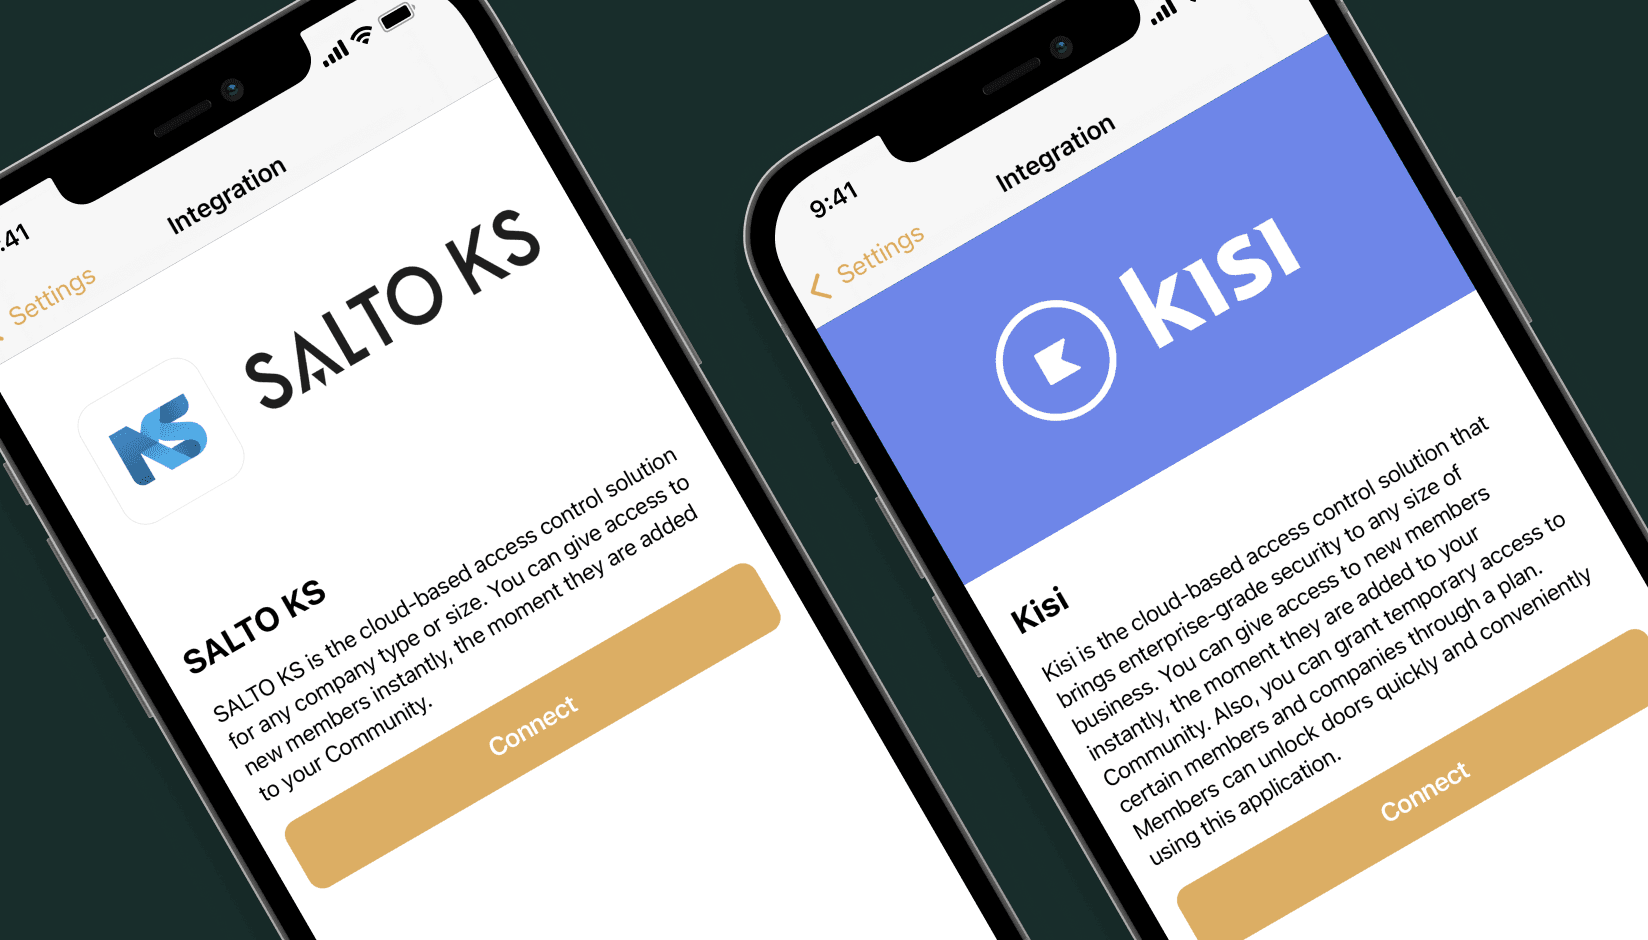 Spacebring integration with access control systems for coworking spaces: Kisi, Salto KS